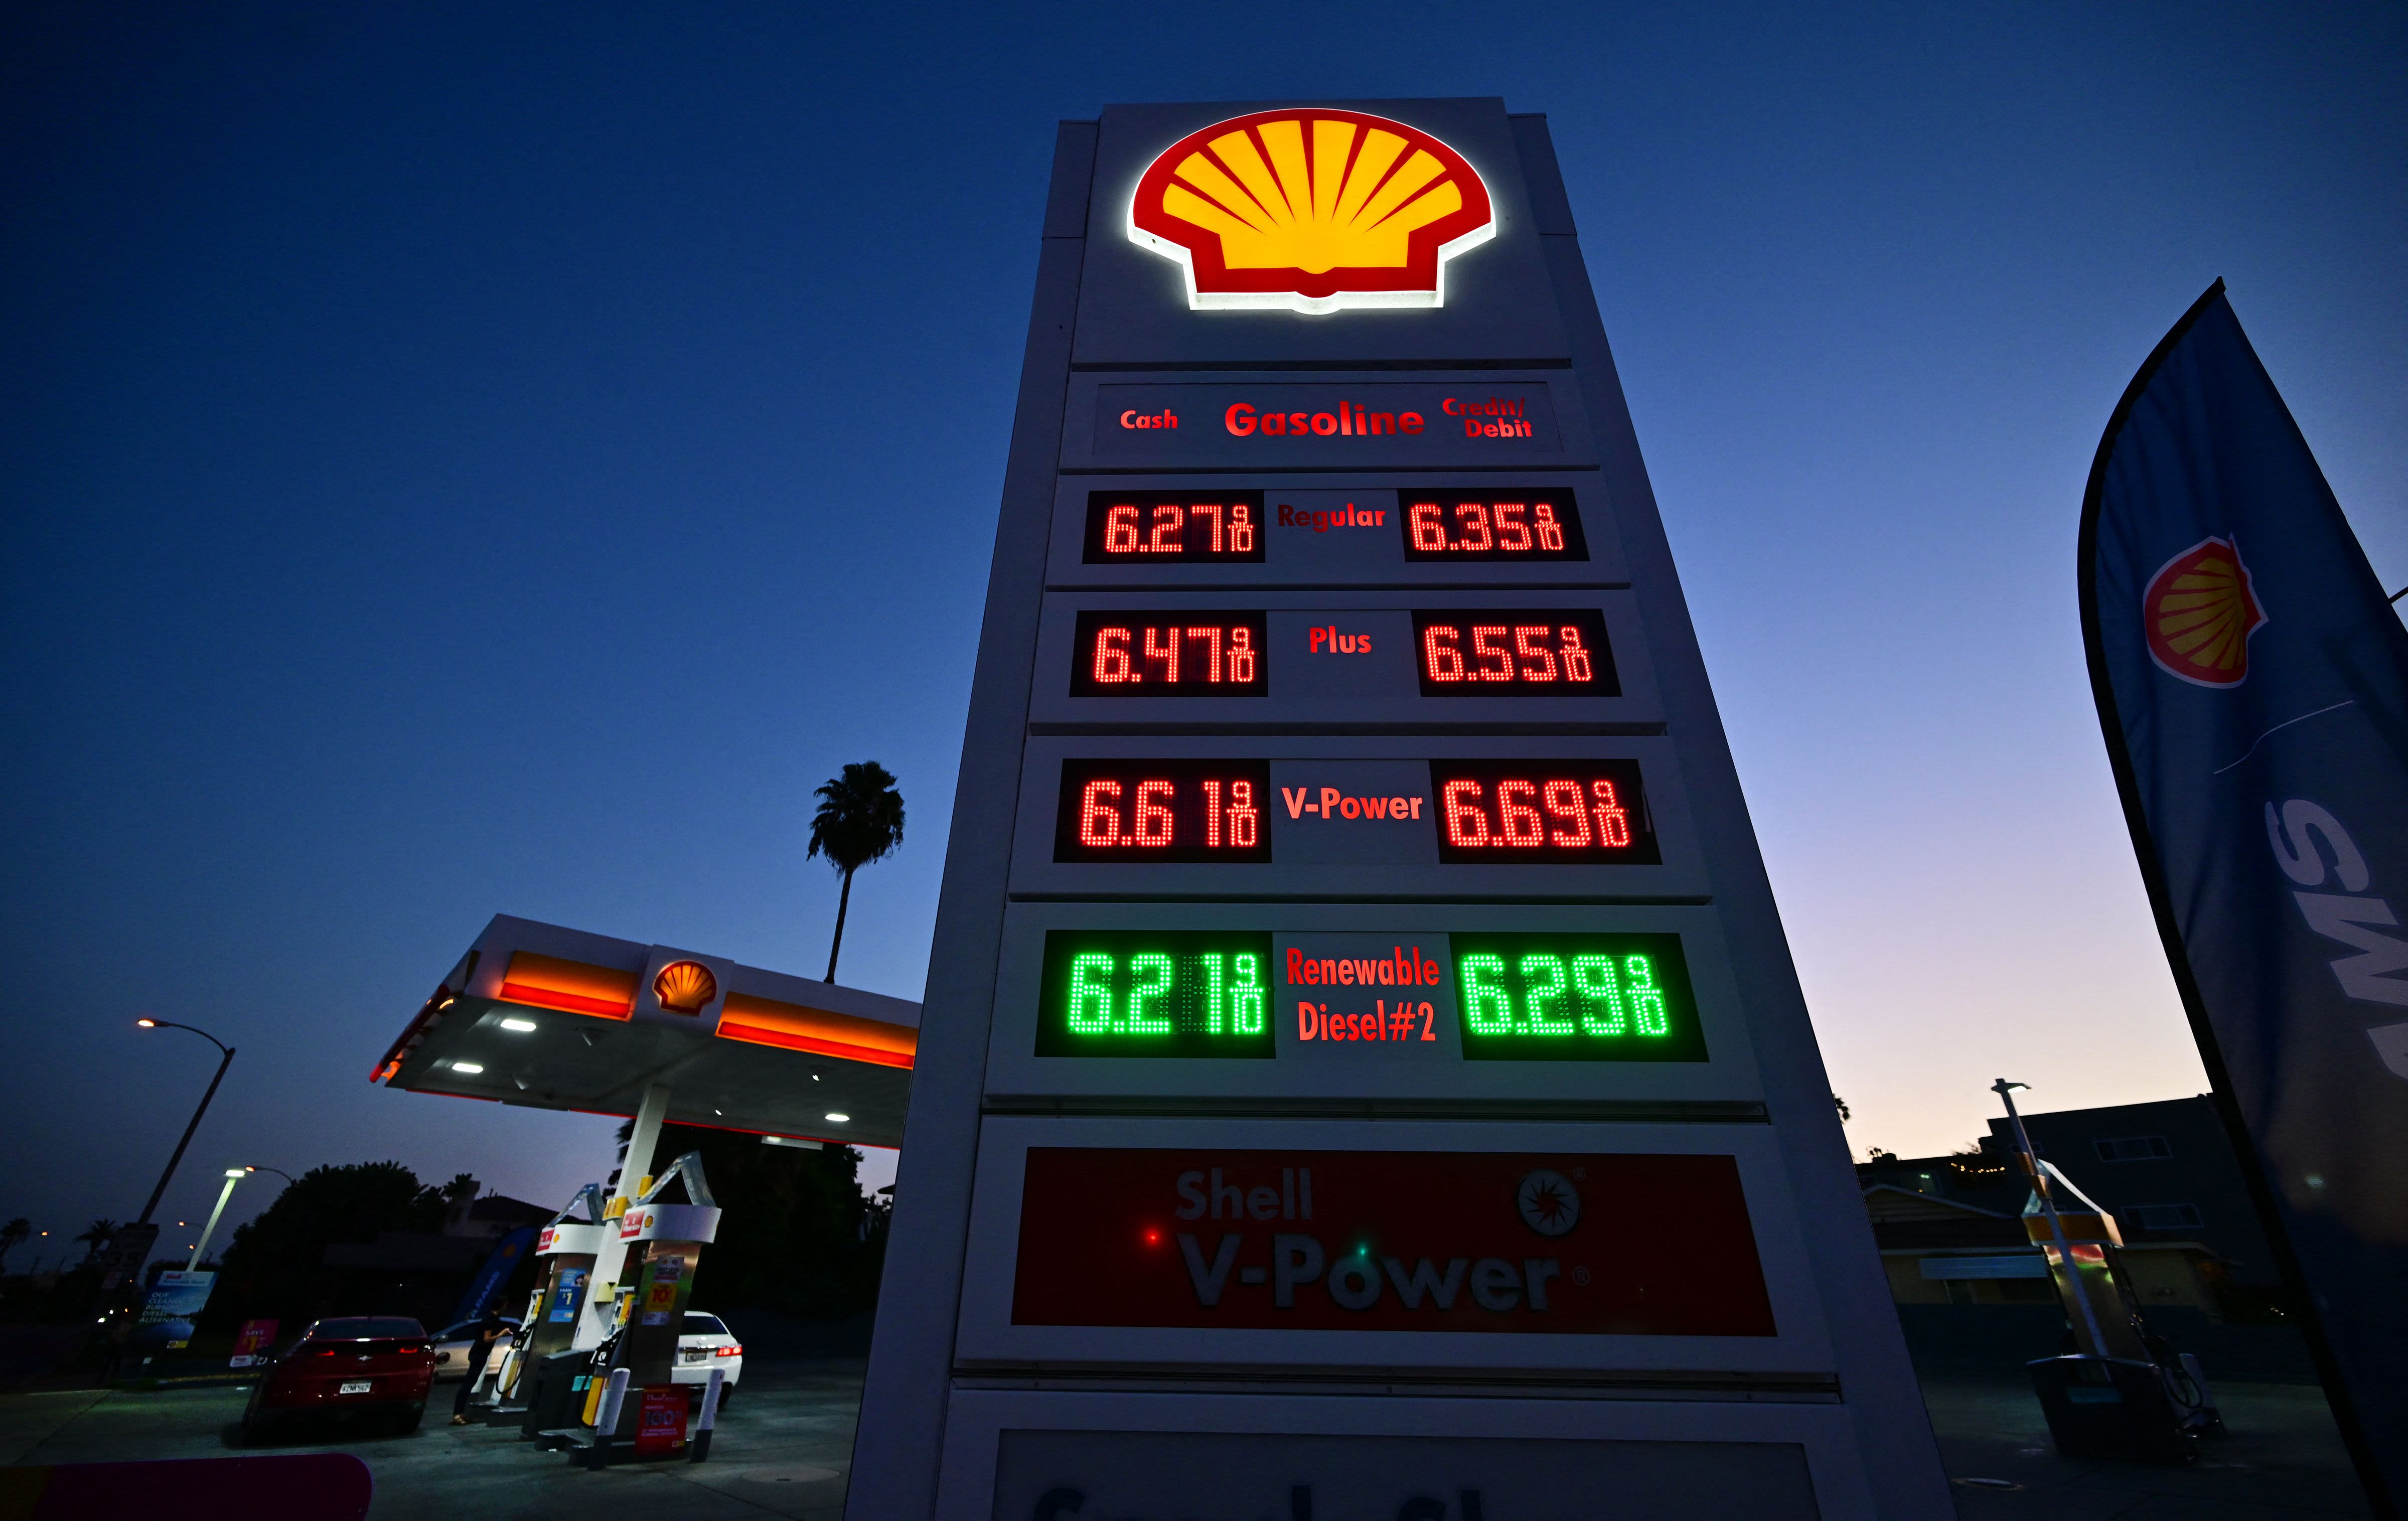 Shell makes $6.2 billion in profits and announces a $3.5 billion share buyback